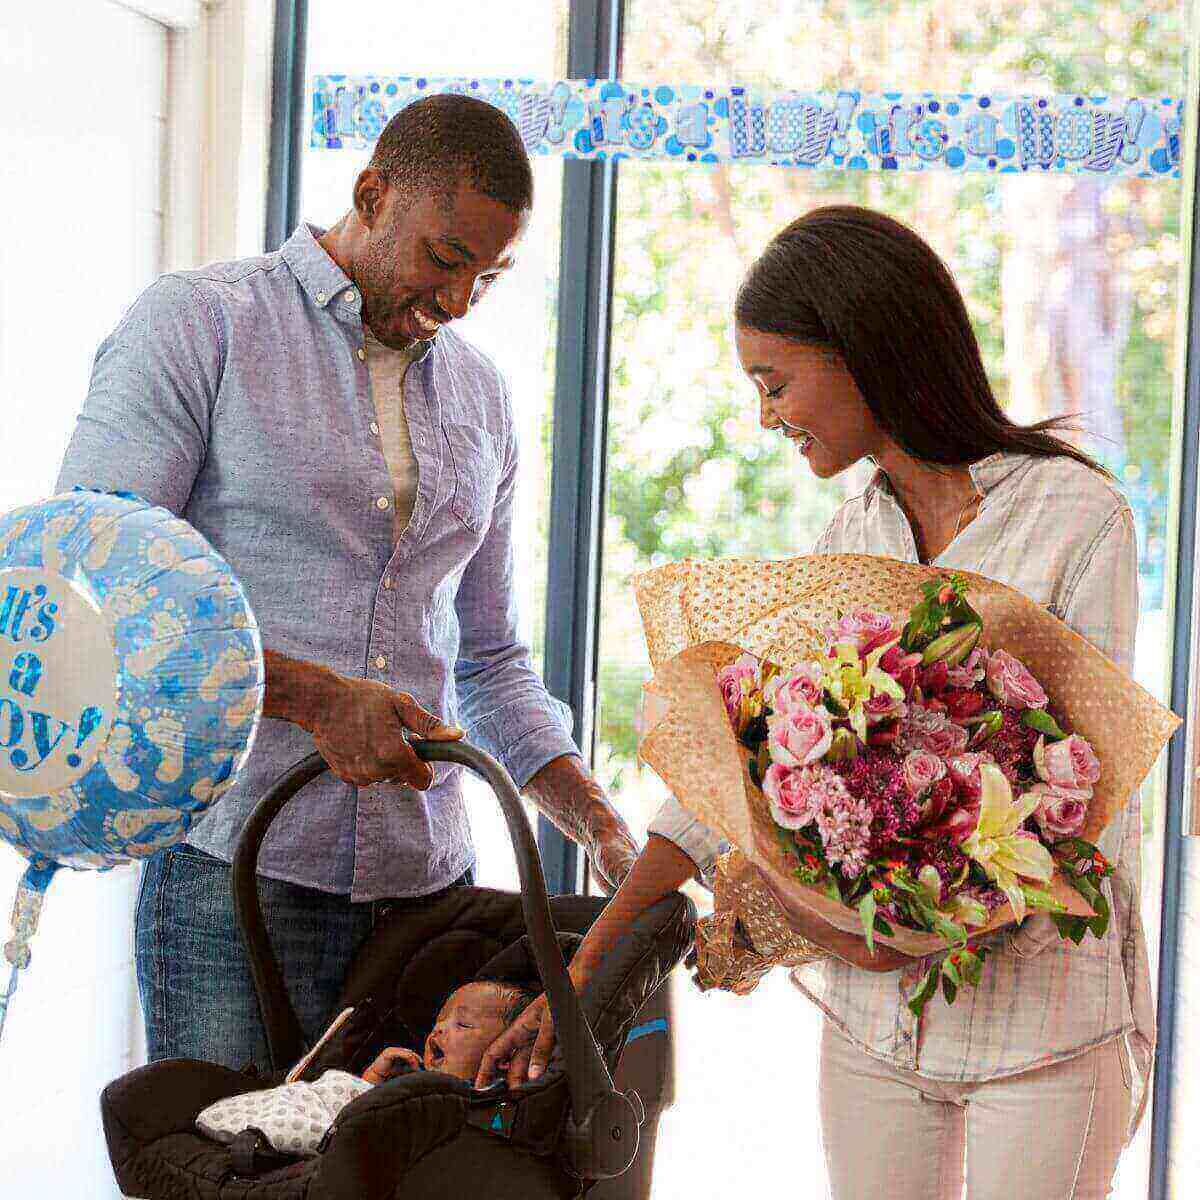 African American Man in jeans with a light blue button up shirt and an an African American woman holding a bouqet of flowers that are yellow, red, and light pink in white jeans and a plaid button up shirt with a newborn baby in a carseat and a balloon that is blue with white footprints on it that says It's a Boy